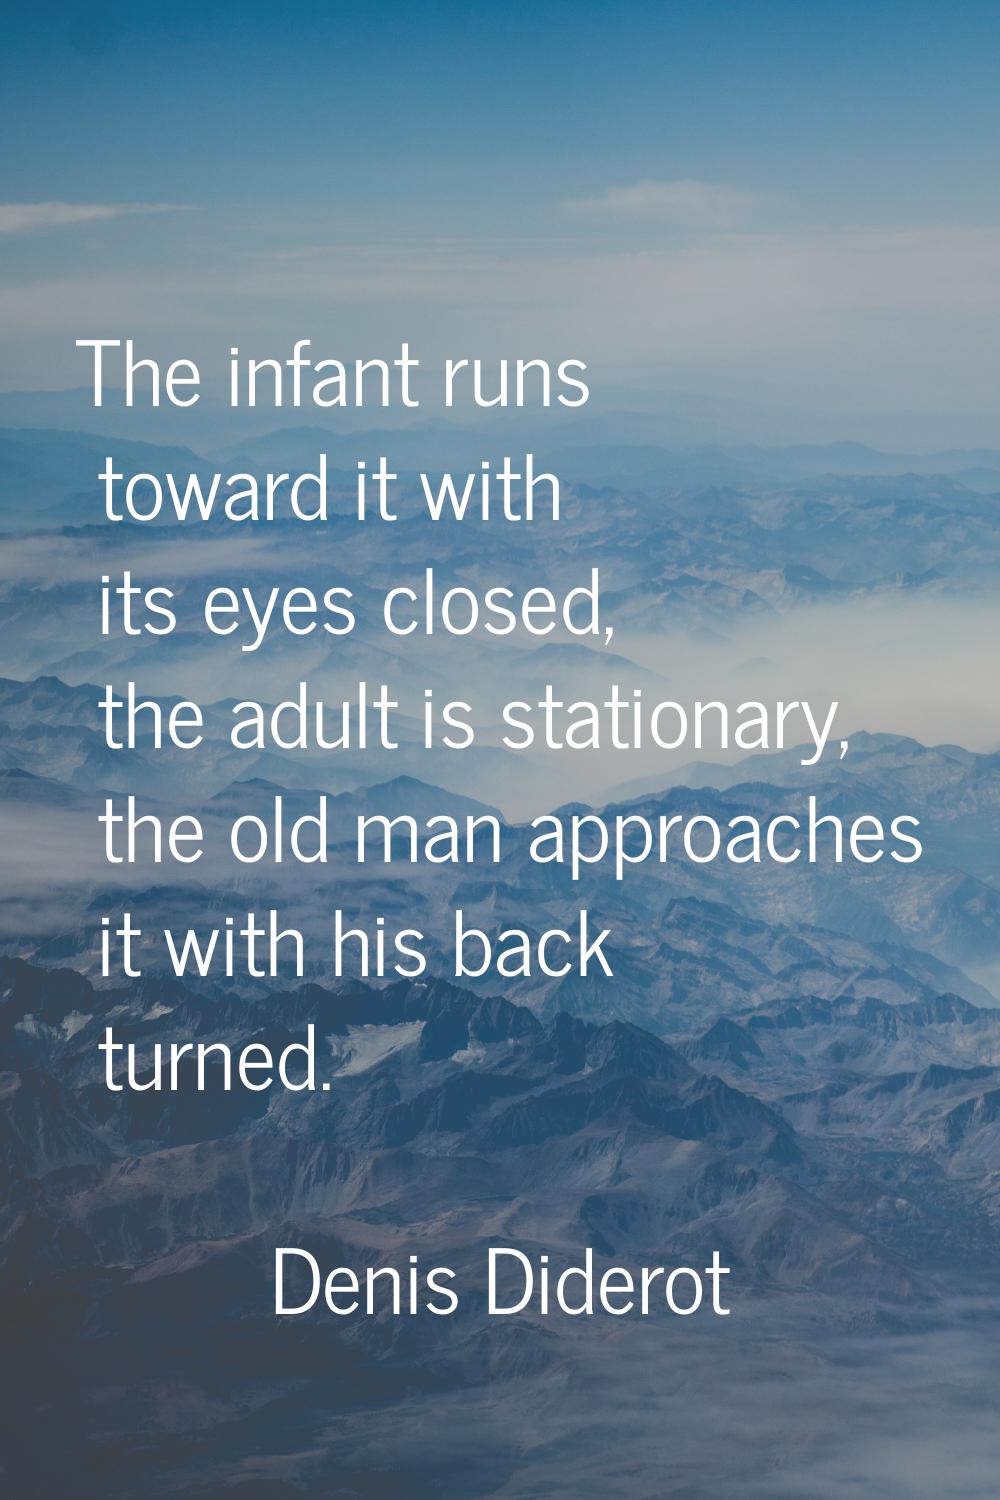 The infant runs toward it with its eyes closed, the adult is stationary, the old man approaches it 